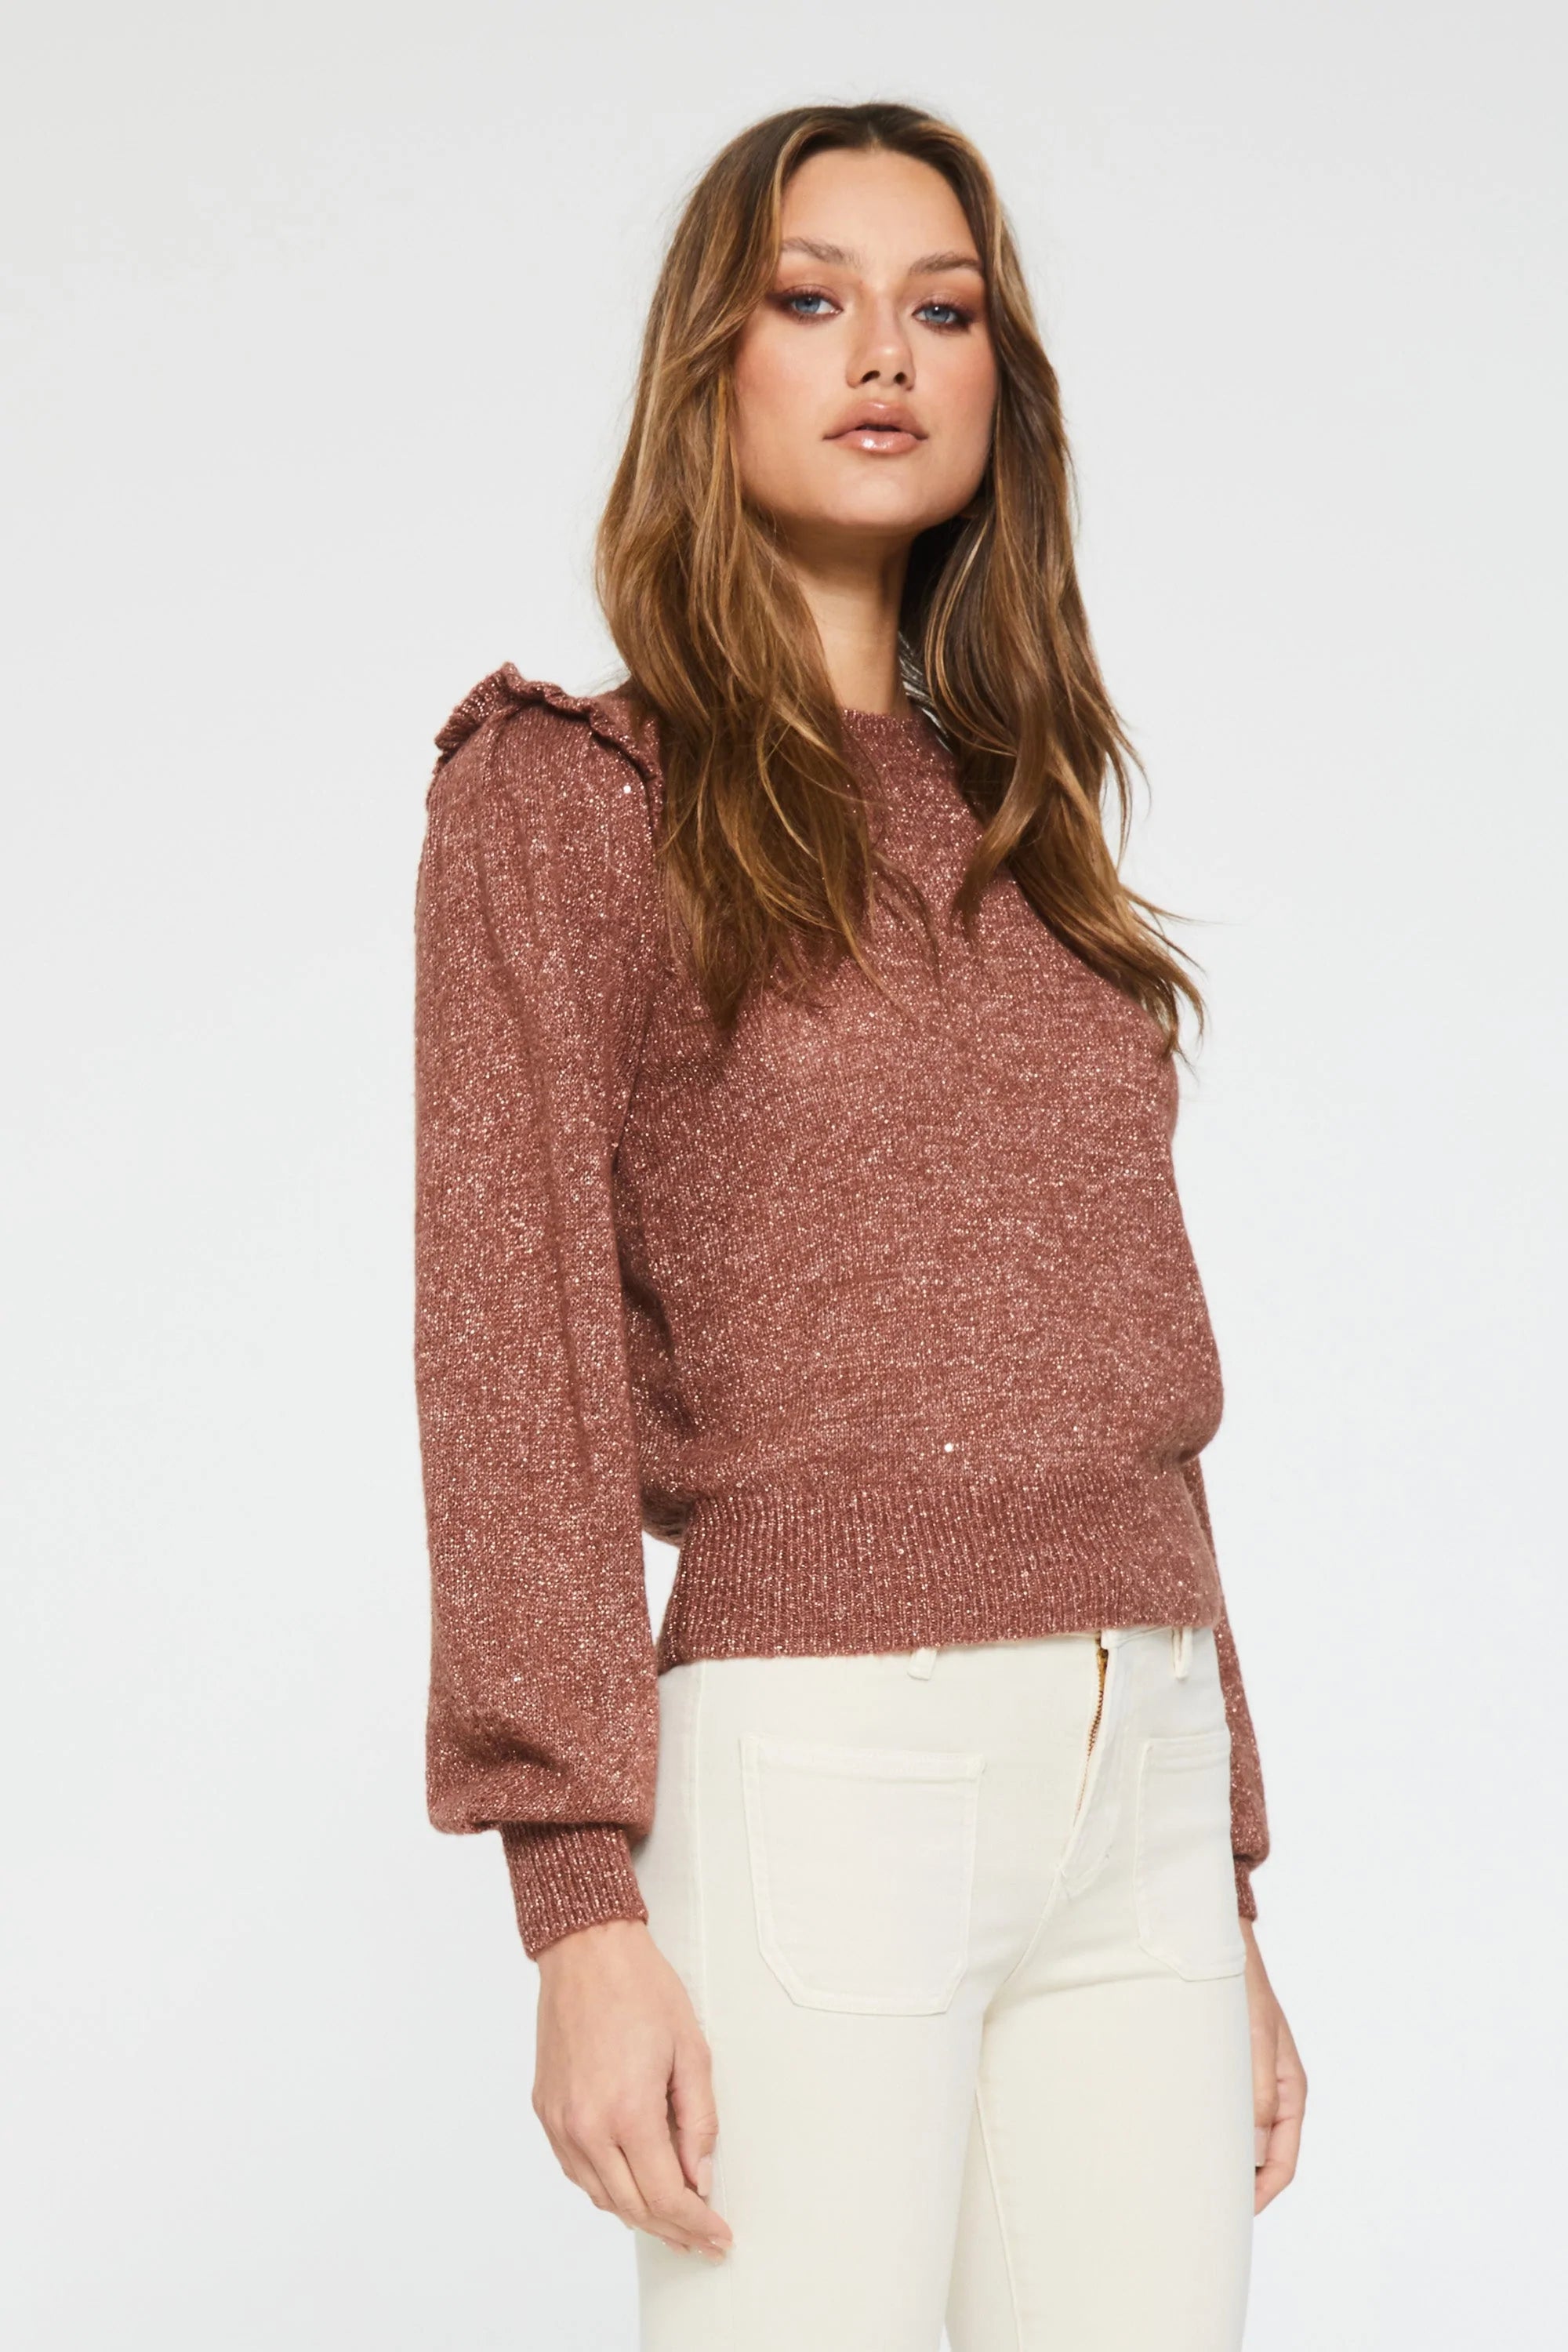 VERA CREW NECK SWEATER WITH RUFFLE SHOULDER DETAIL